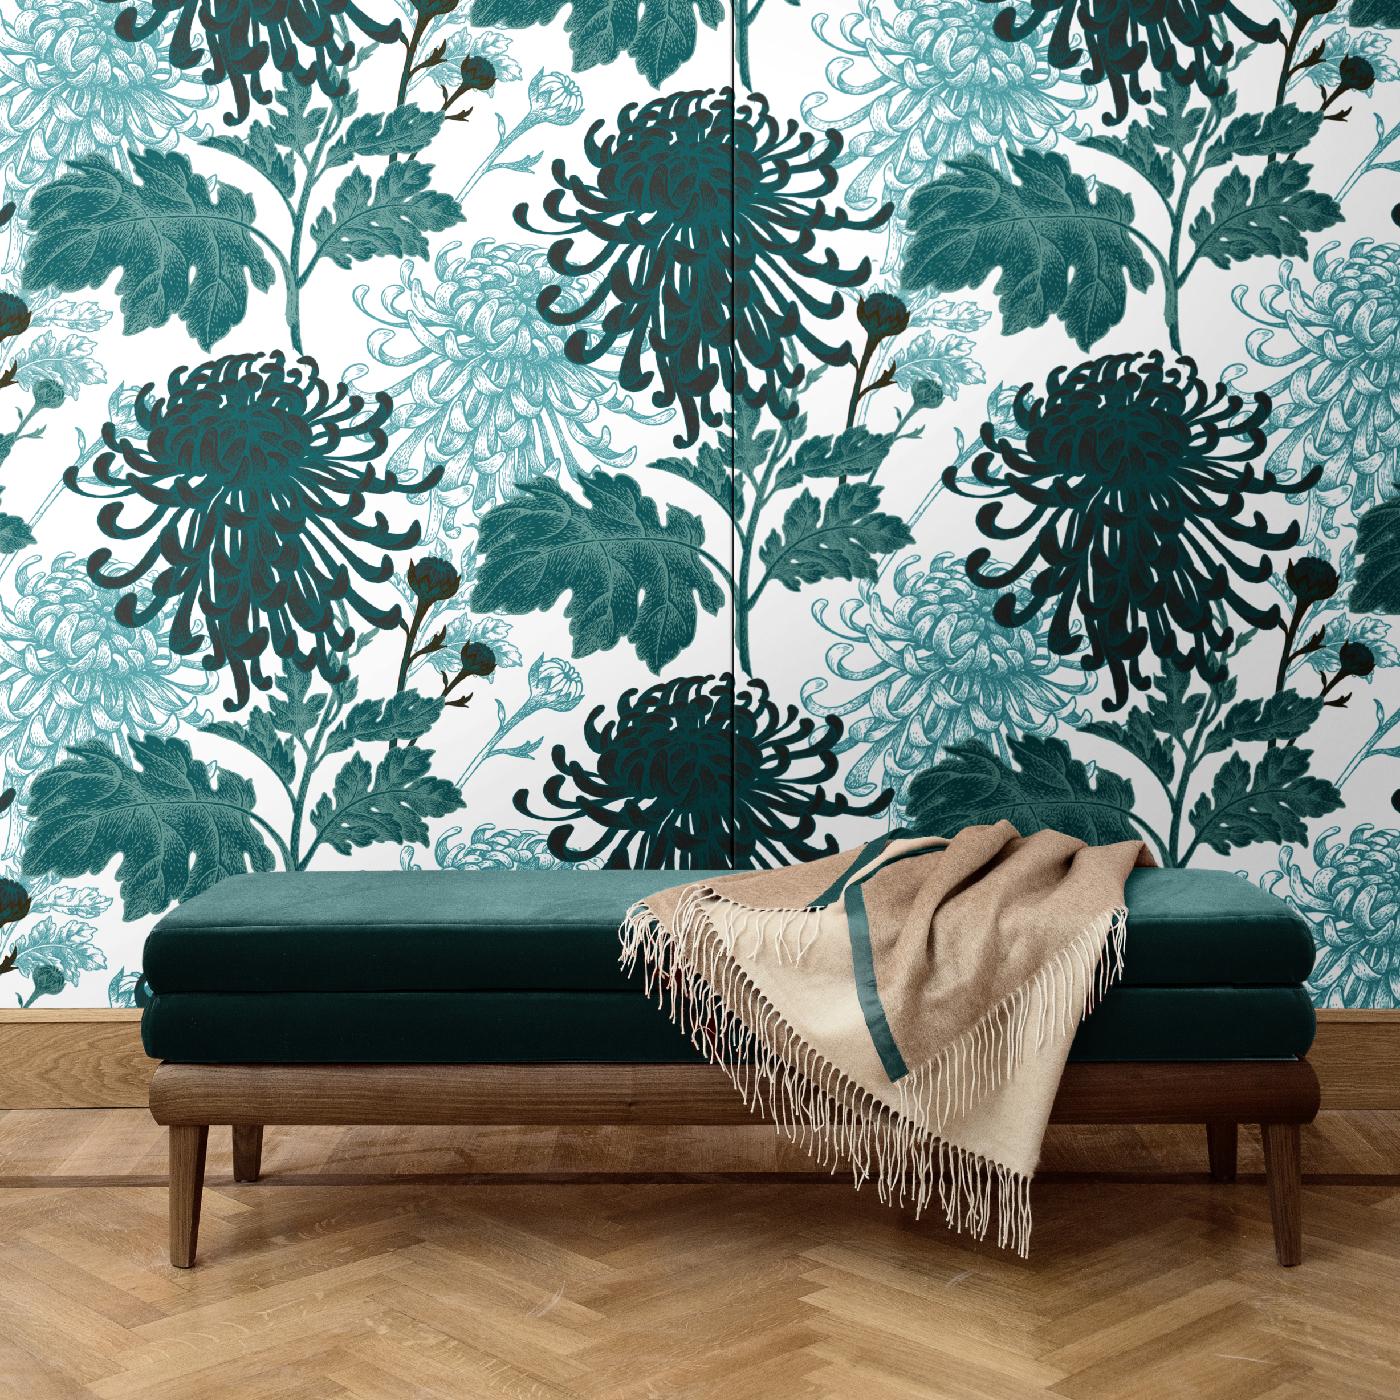 This mesmerizing design is part of the Mixed Dahlia collection and, true to its name, features the juxtaposition of two blossoming flowers in three different tones of green for a stunning decoration. This piece was crafted of silk and cotton and is